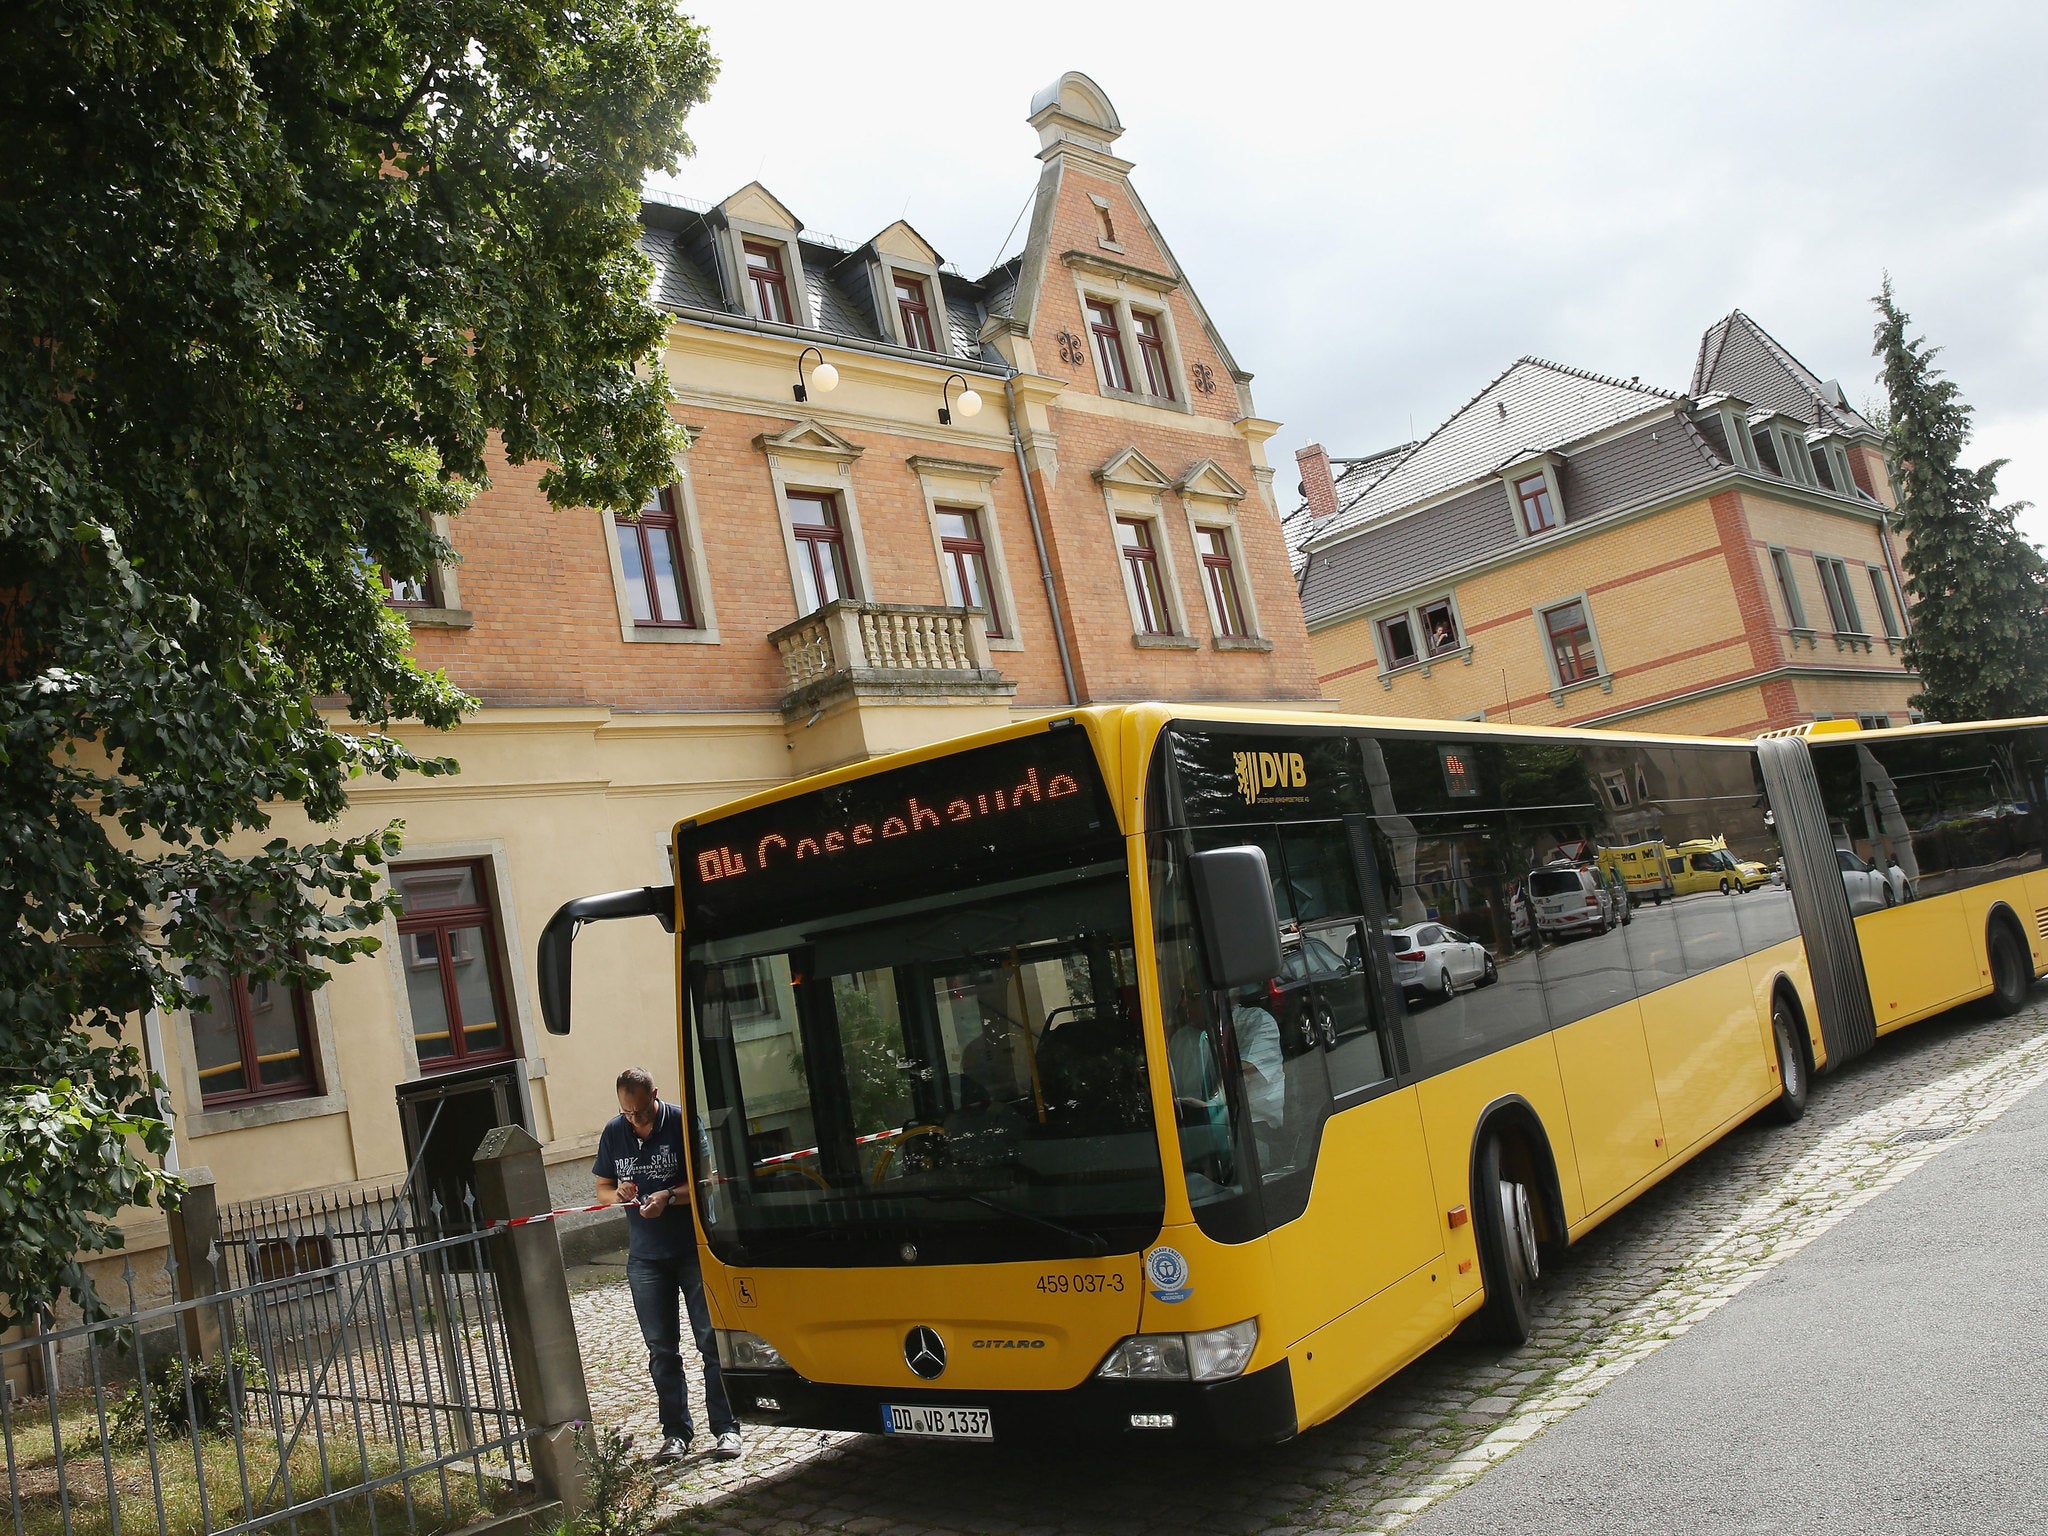 At least three people boarded the bus (not pictured) in Ingolstadt